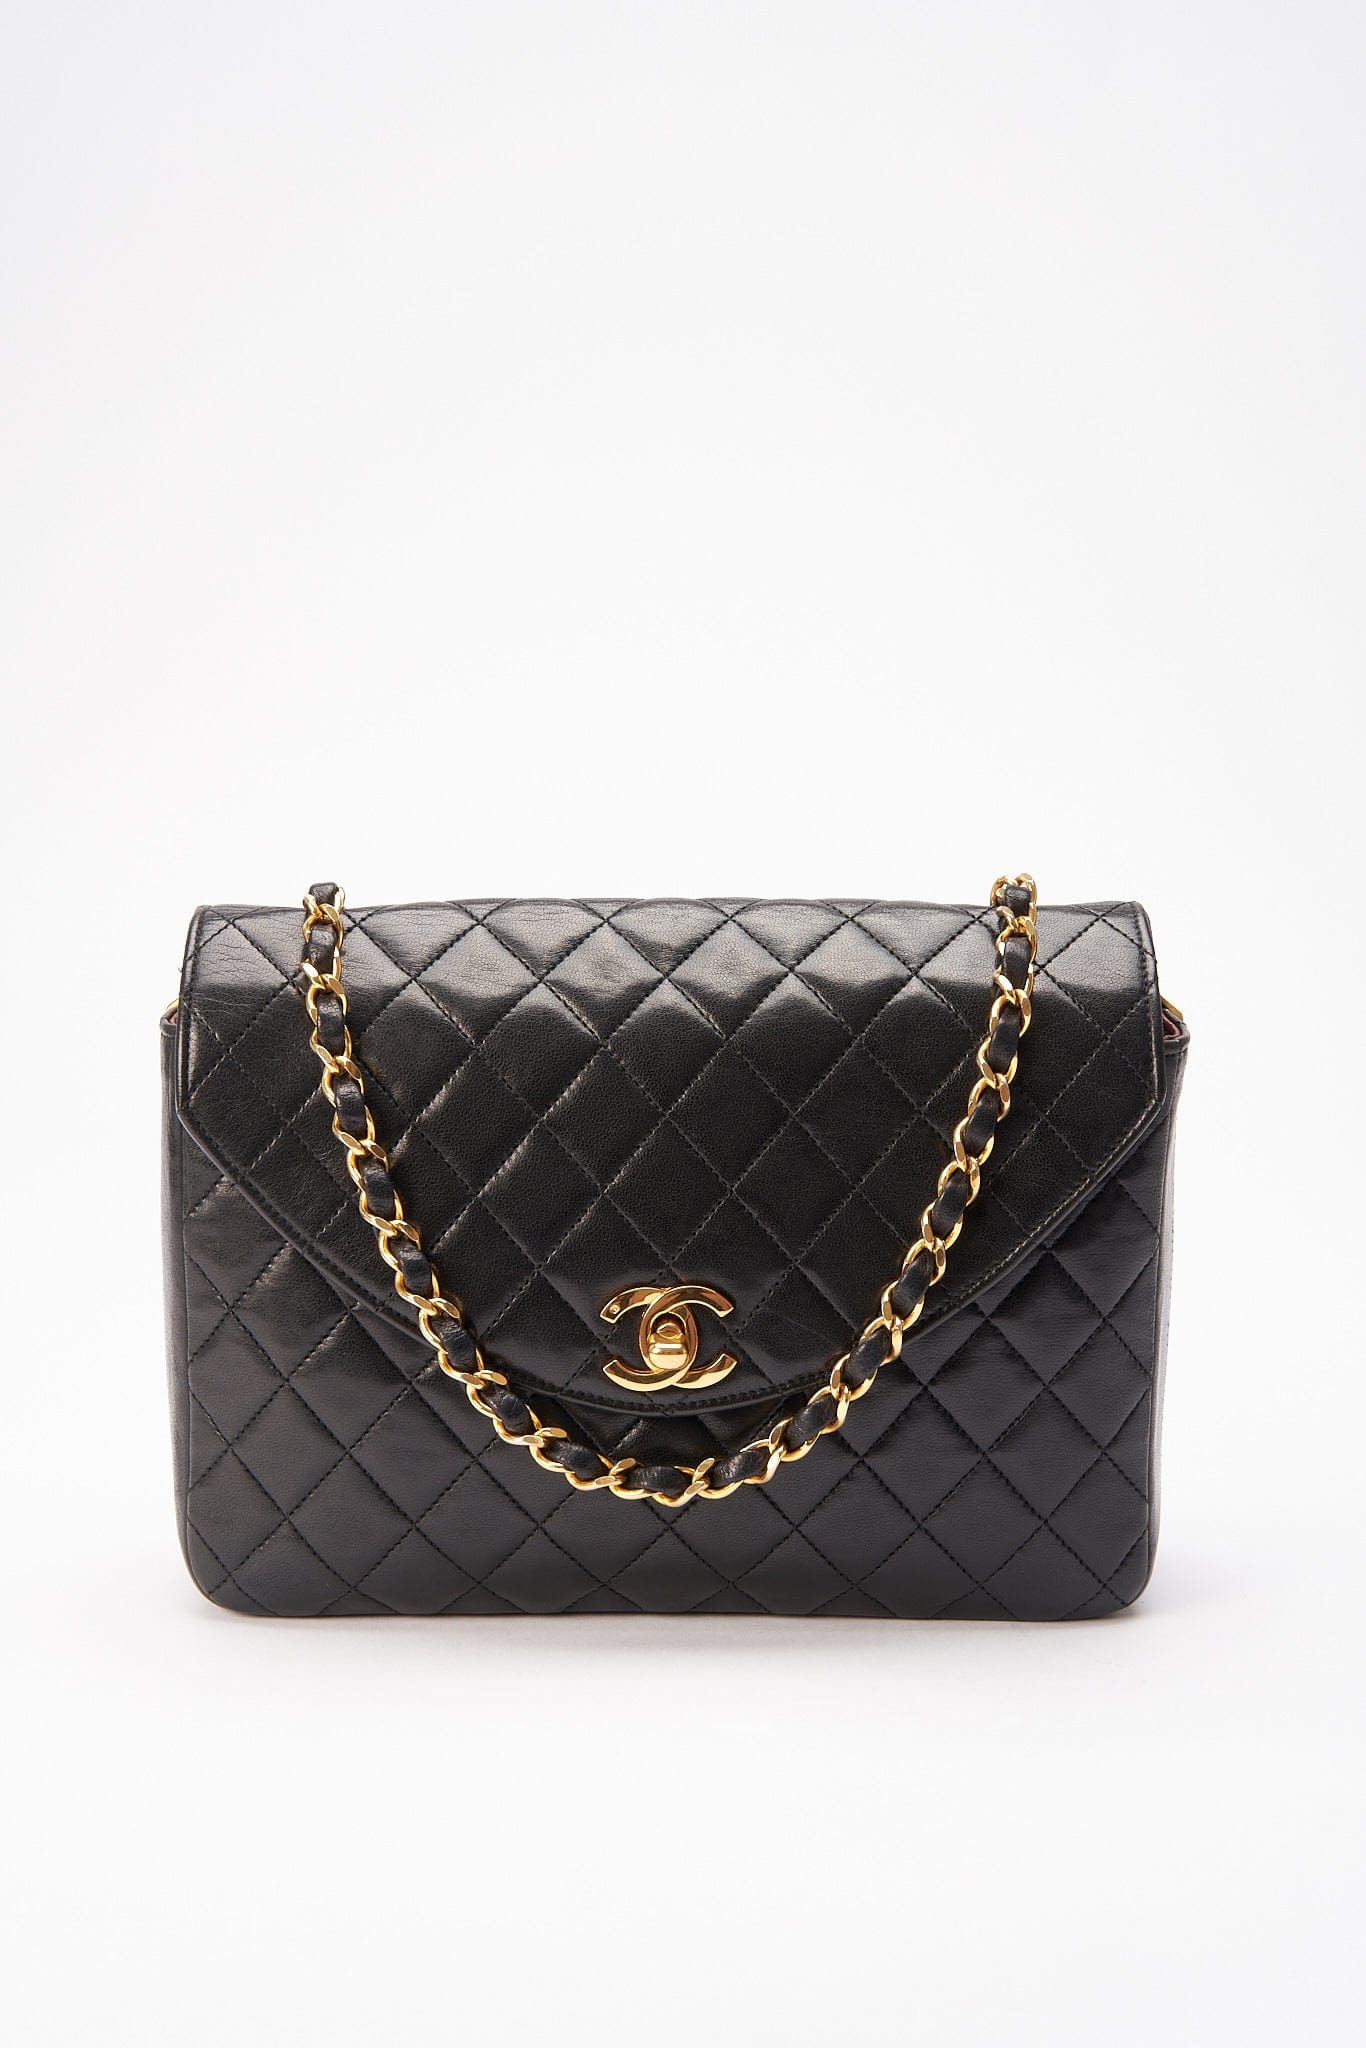 Chanel Vintage Black Single Flap with 24k gold plated hardware